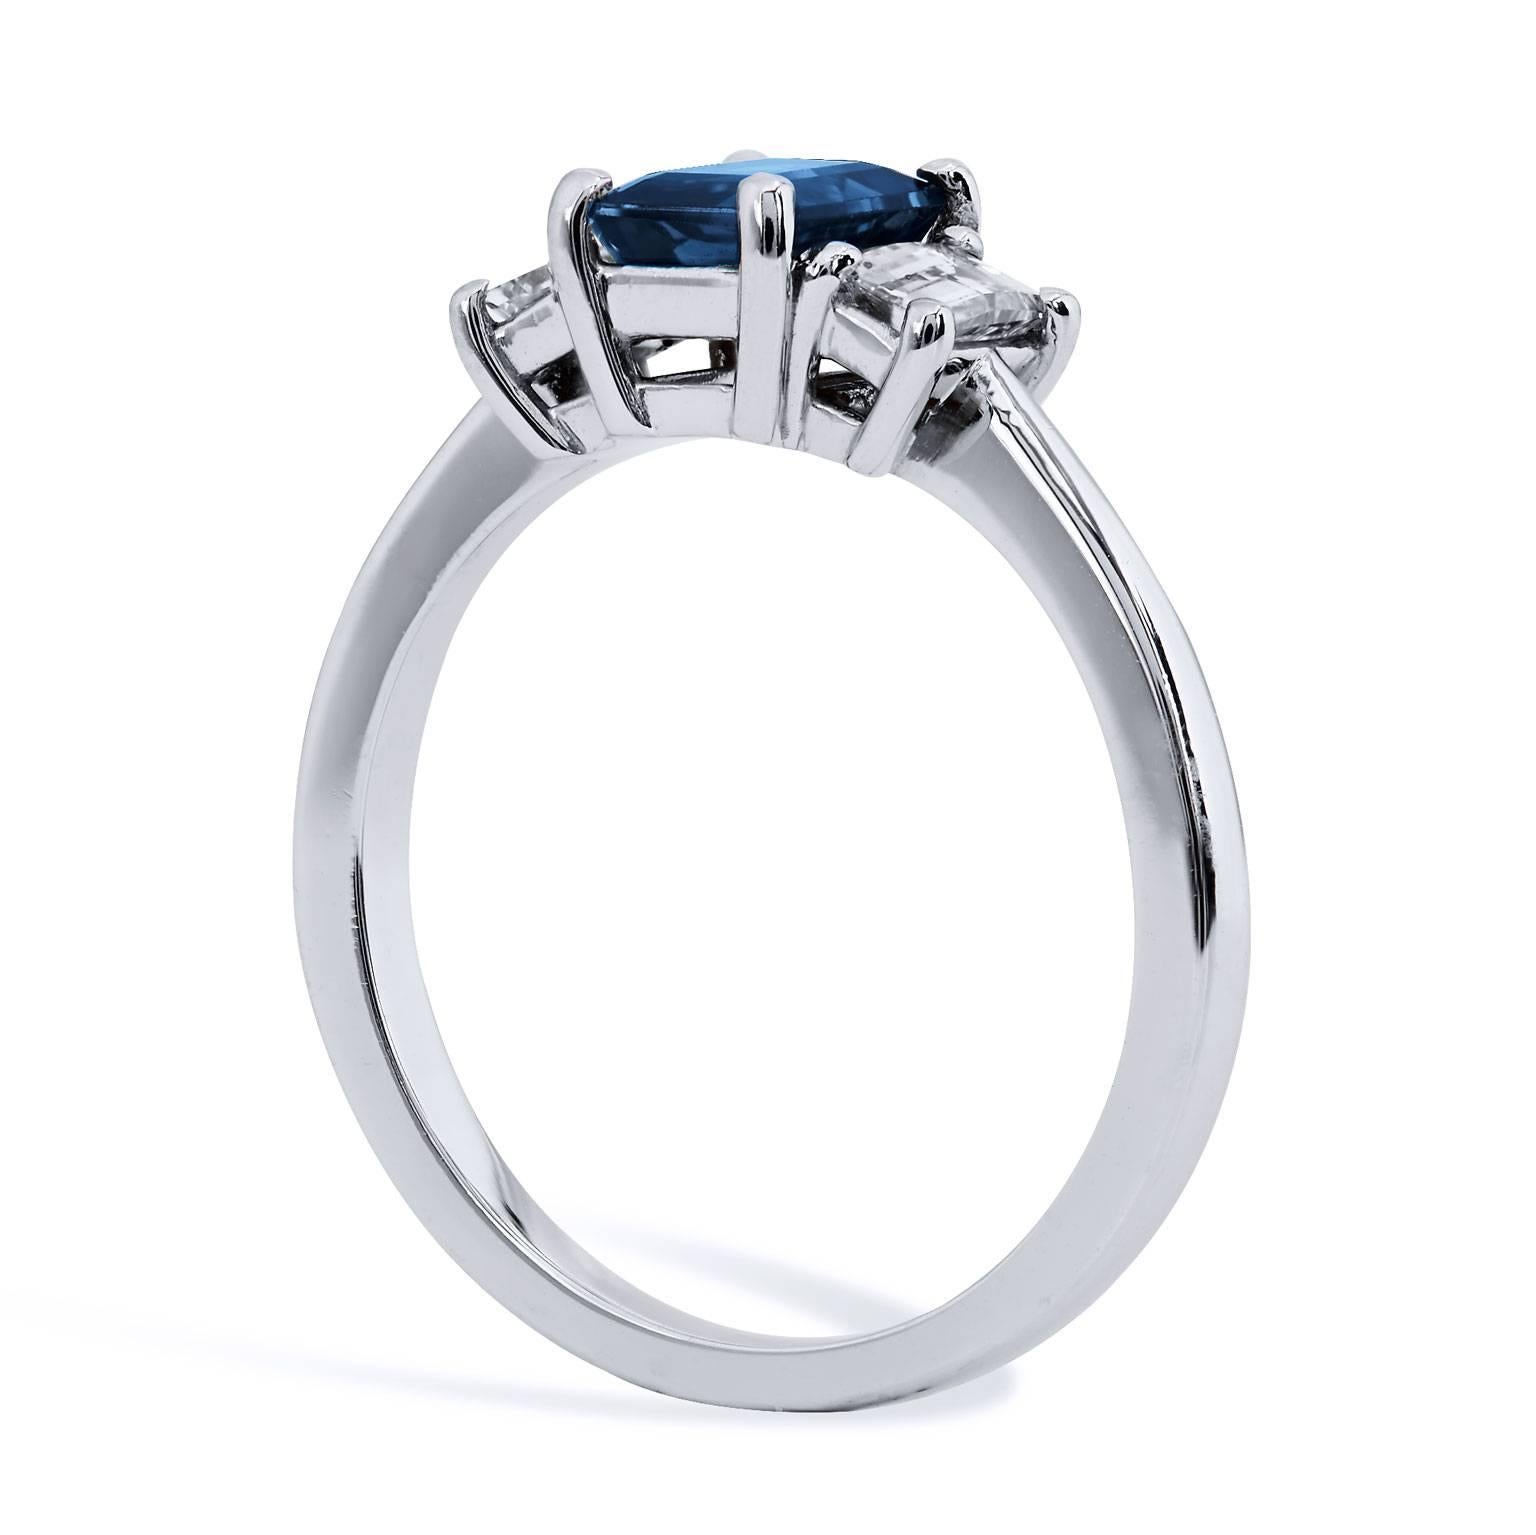 An embellished yet minimal design, this spectacular platinum ring features a 1.28 carat emerald cut blue sapphire set at center while 0.56 carat of emerald cut diamond side stones (J/k/VS2/SI1) enhance the four-prong blue sapphire- sweet and